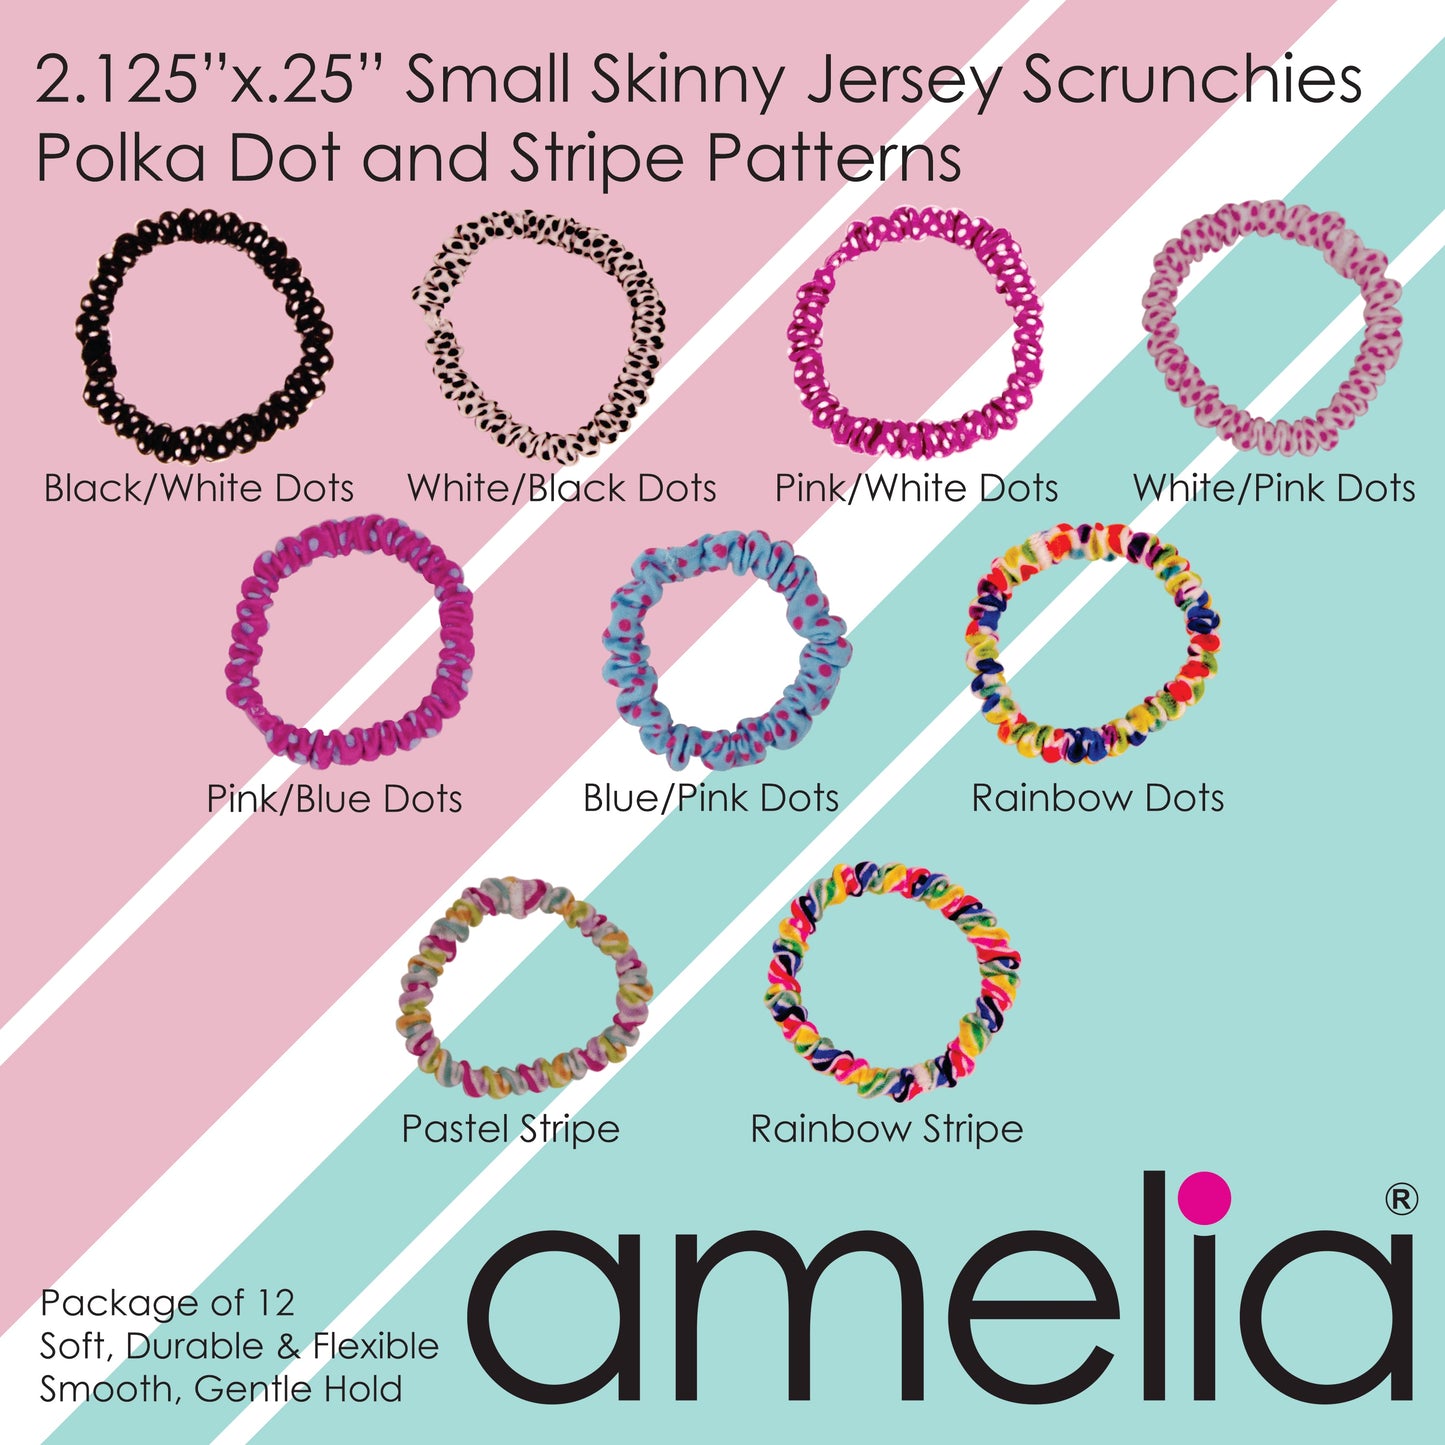 Amelia Beauty, White with Black Dots Skinny Jersey Scrunchies, 2.125in Diameter, Gentle on Hair, Strong Hold, No Snag, No Dents or Creases. 12 Pack